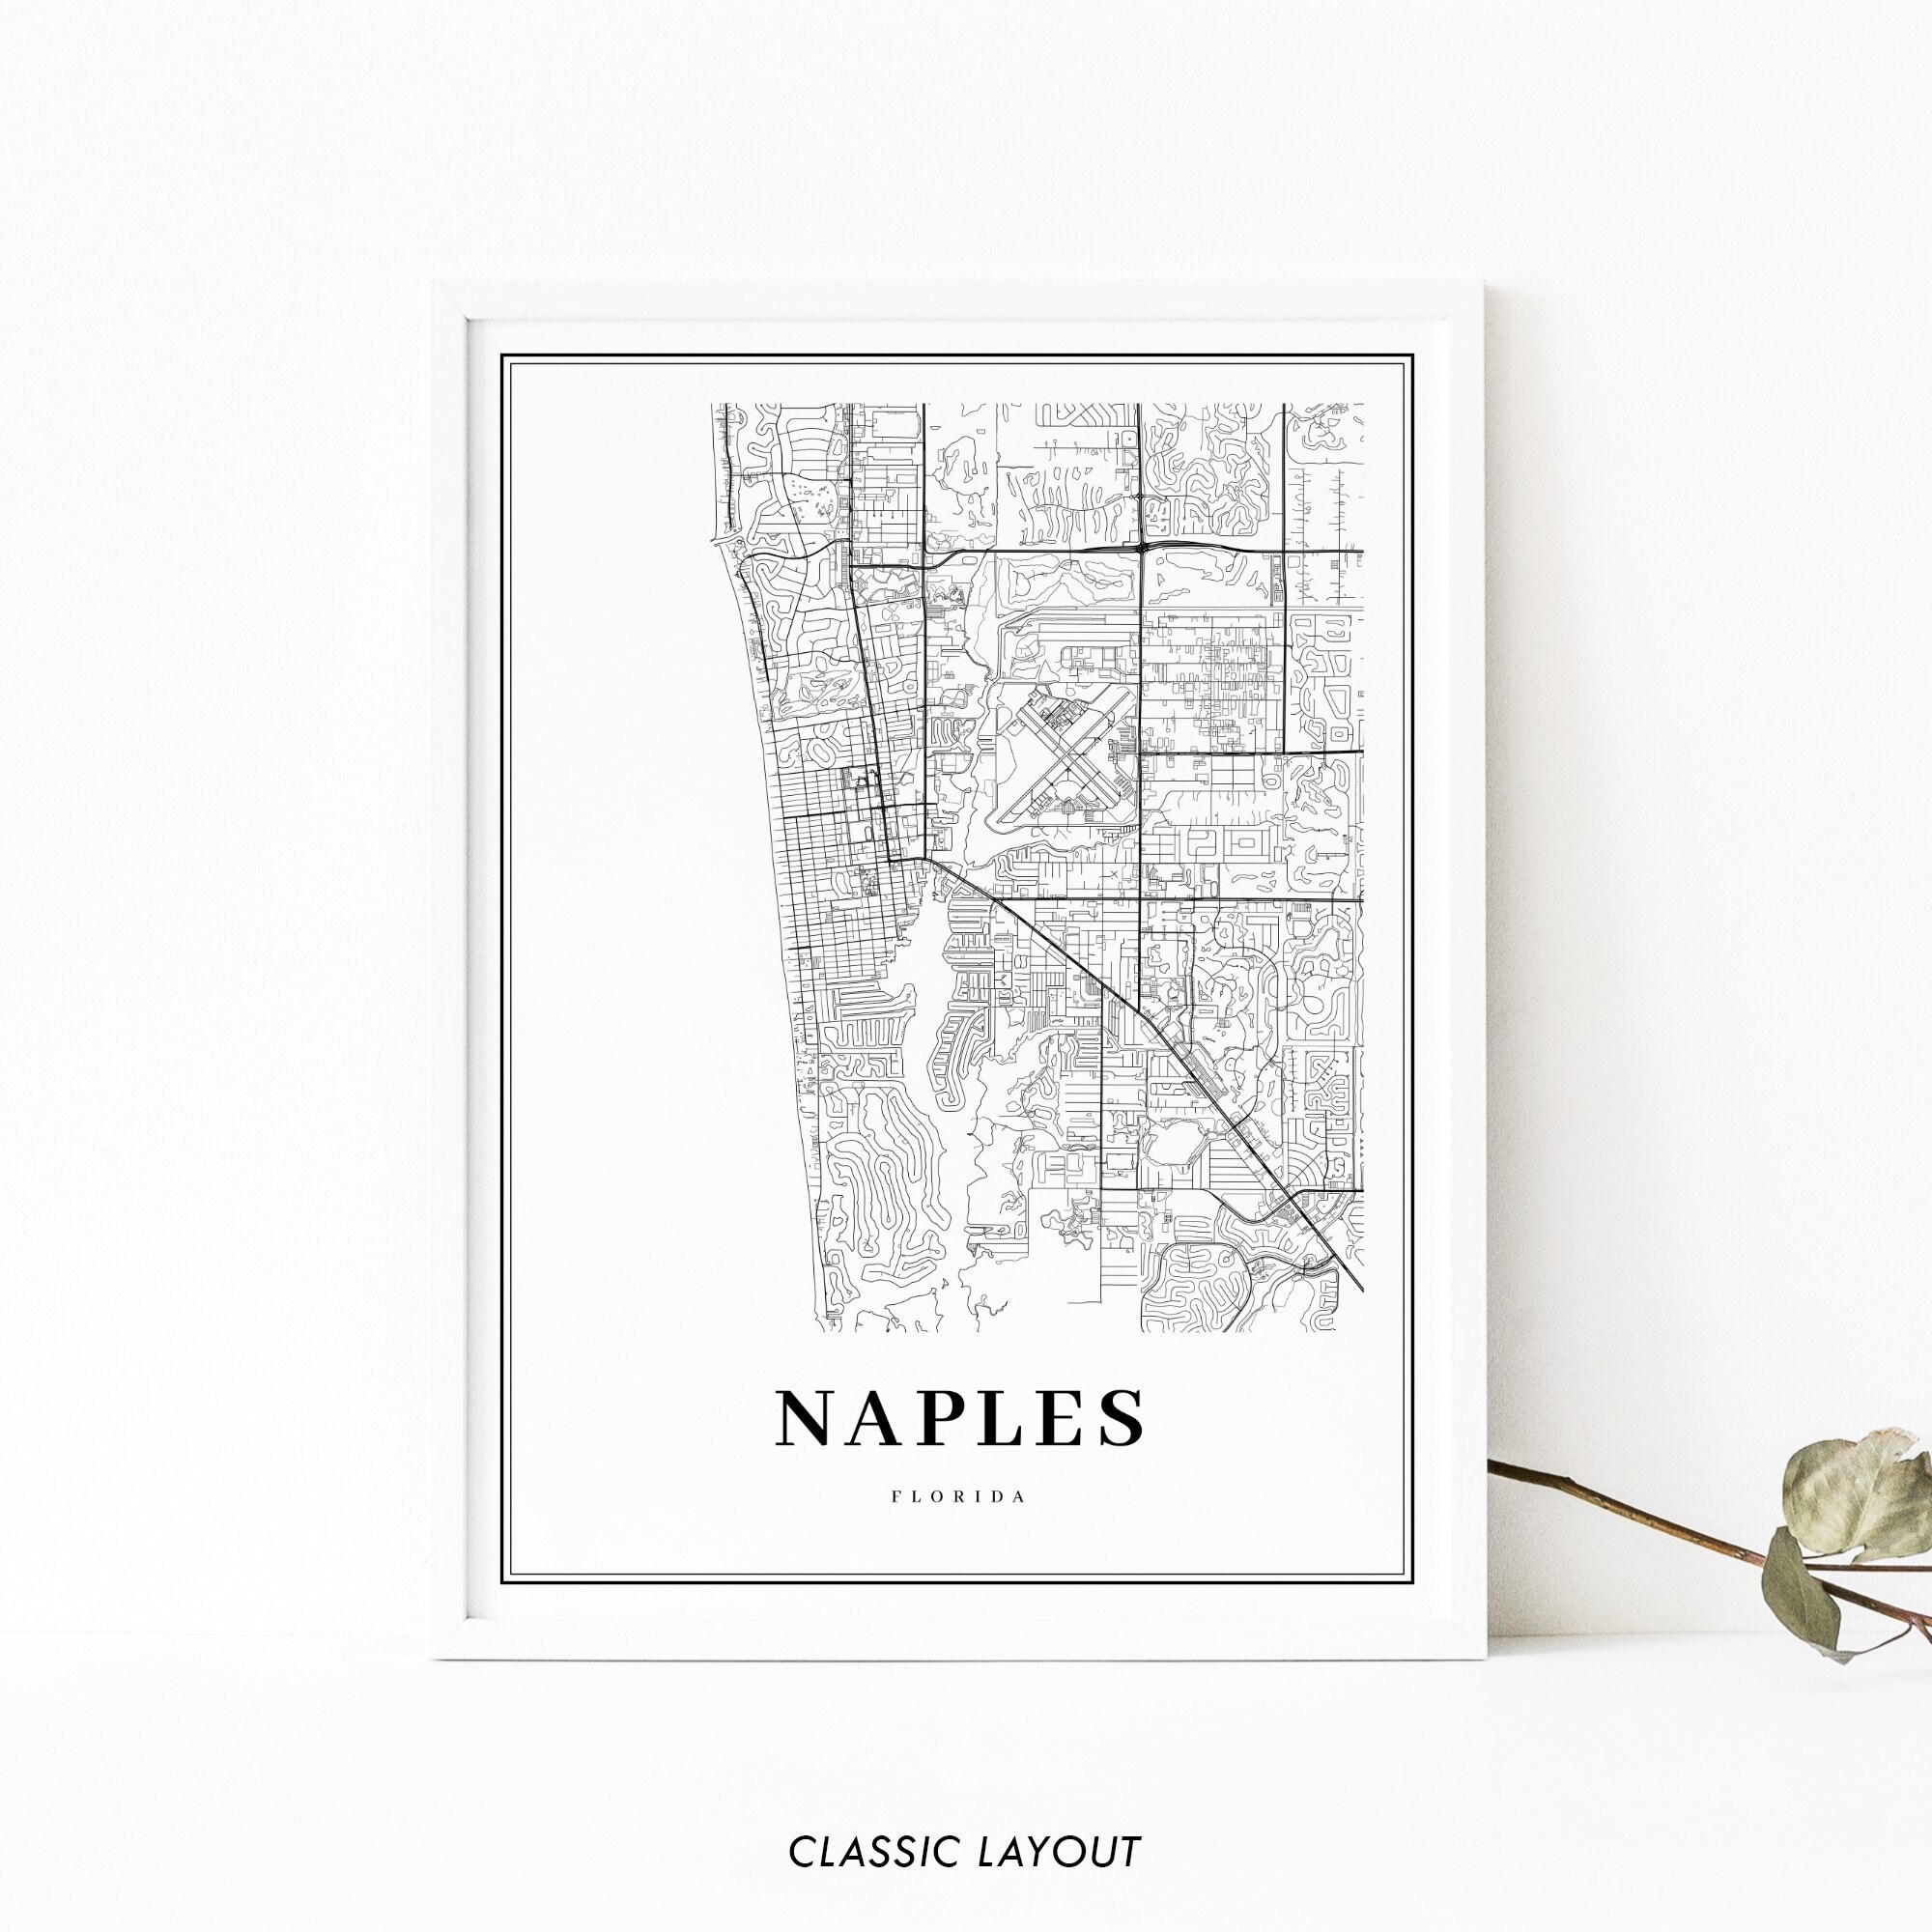 Naples FL Map Print Florida USA Map Art Poster Collier County City Road Street Map Print Nursery Room Wall Office Decor Printable Map Etsy Sweden